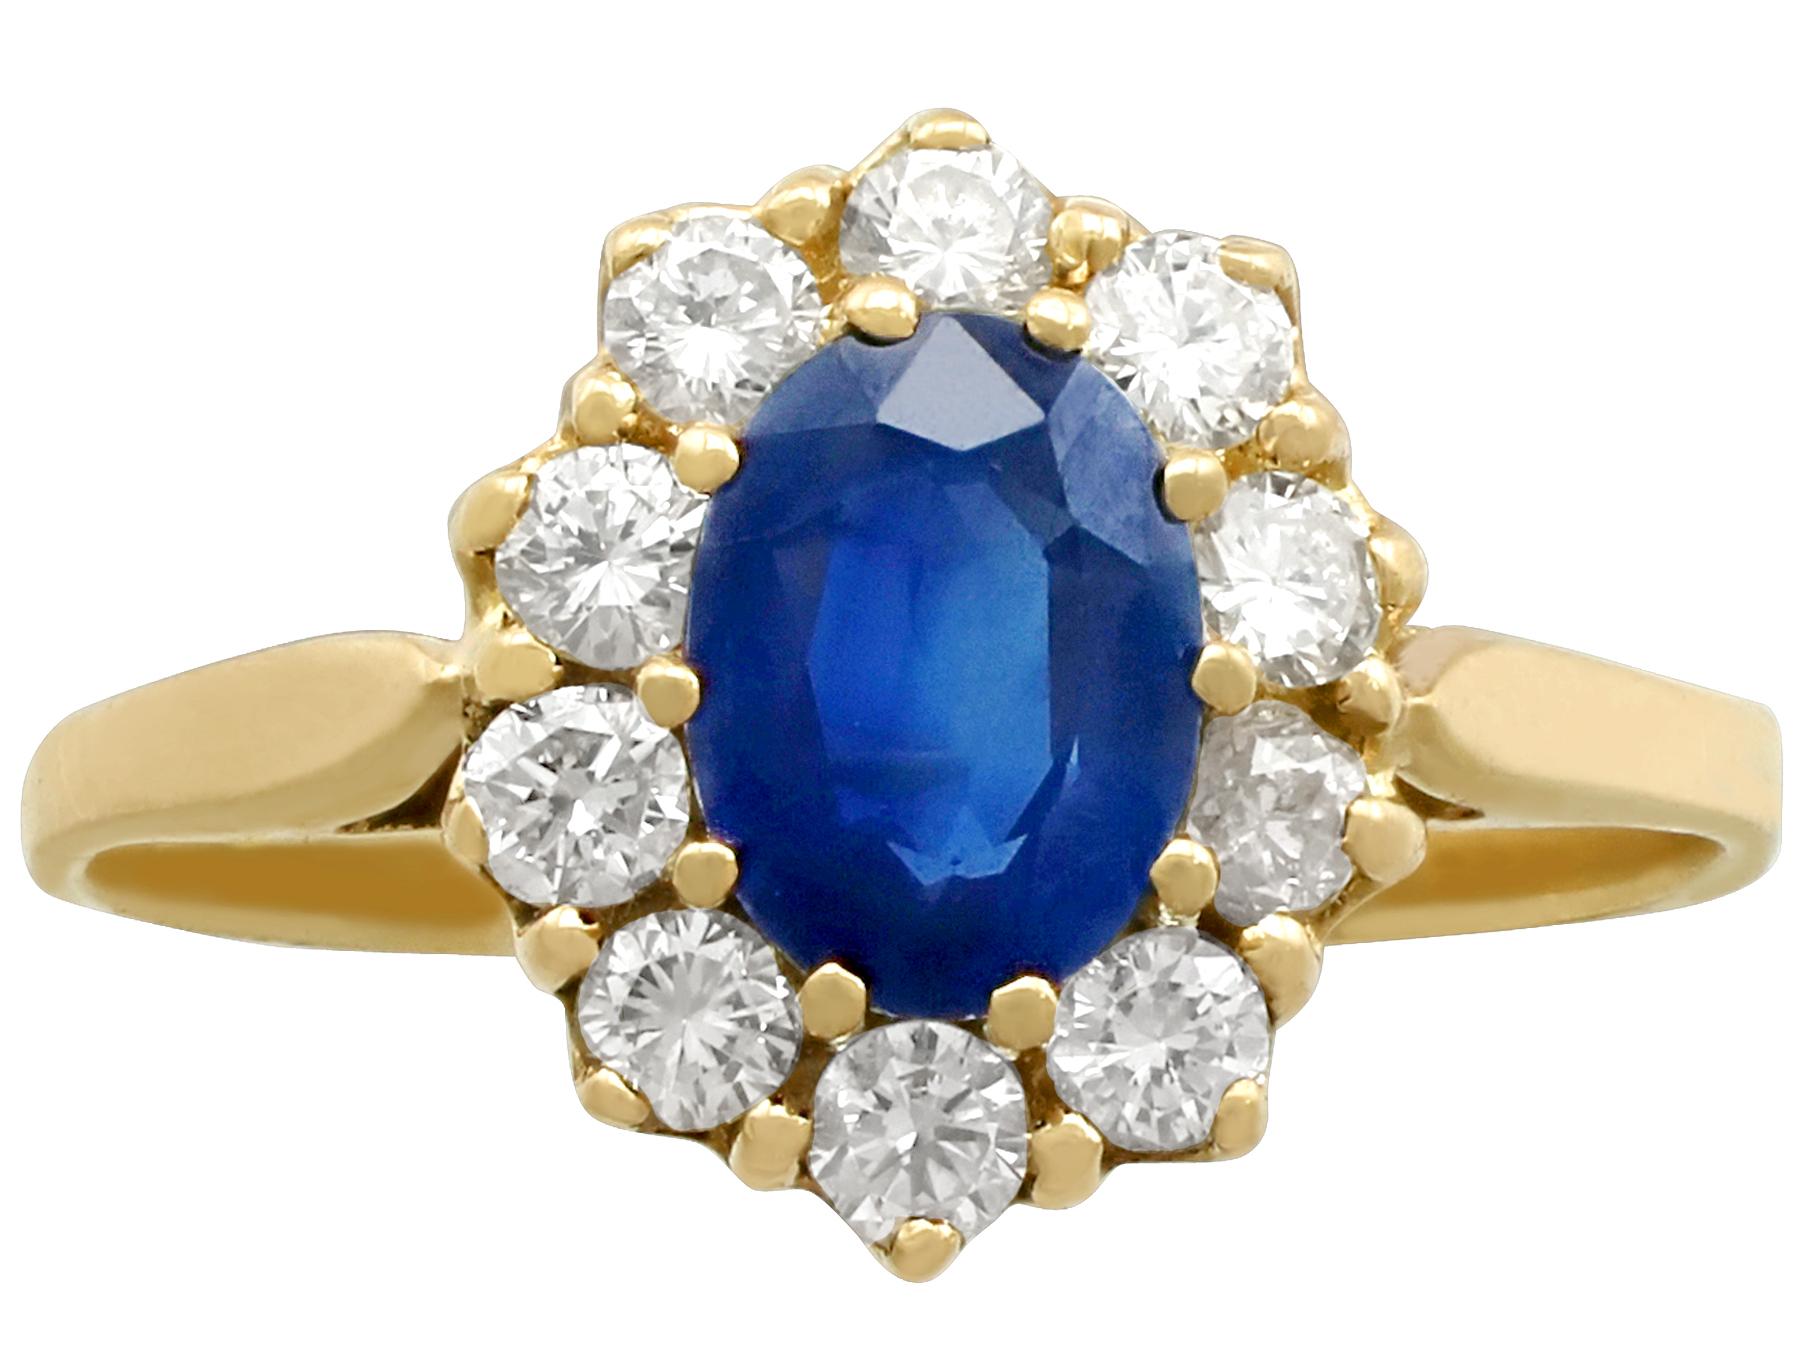 A fine and impressive 1.05 carat natural blue sapphire and 0.46 carat diamond, 18k yellow gold cluster / dress ring; part of our diverse vintage jewellery and estate jewelry collections

This fine and impressive vintage sapphire cluster ring has